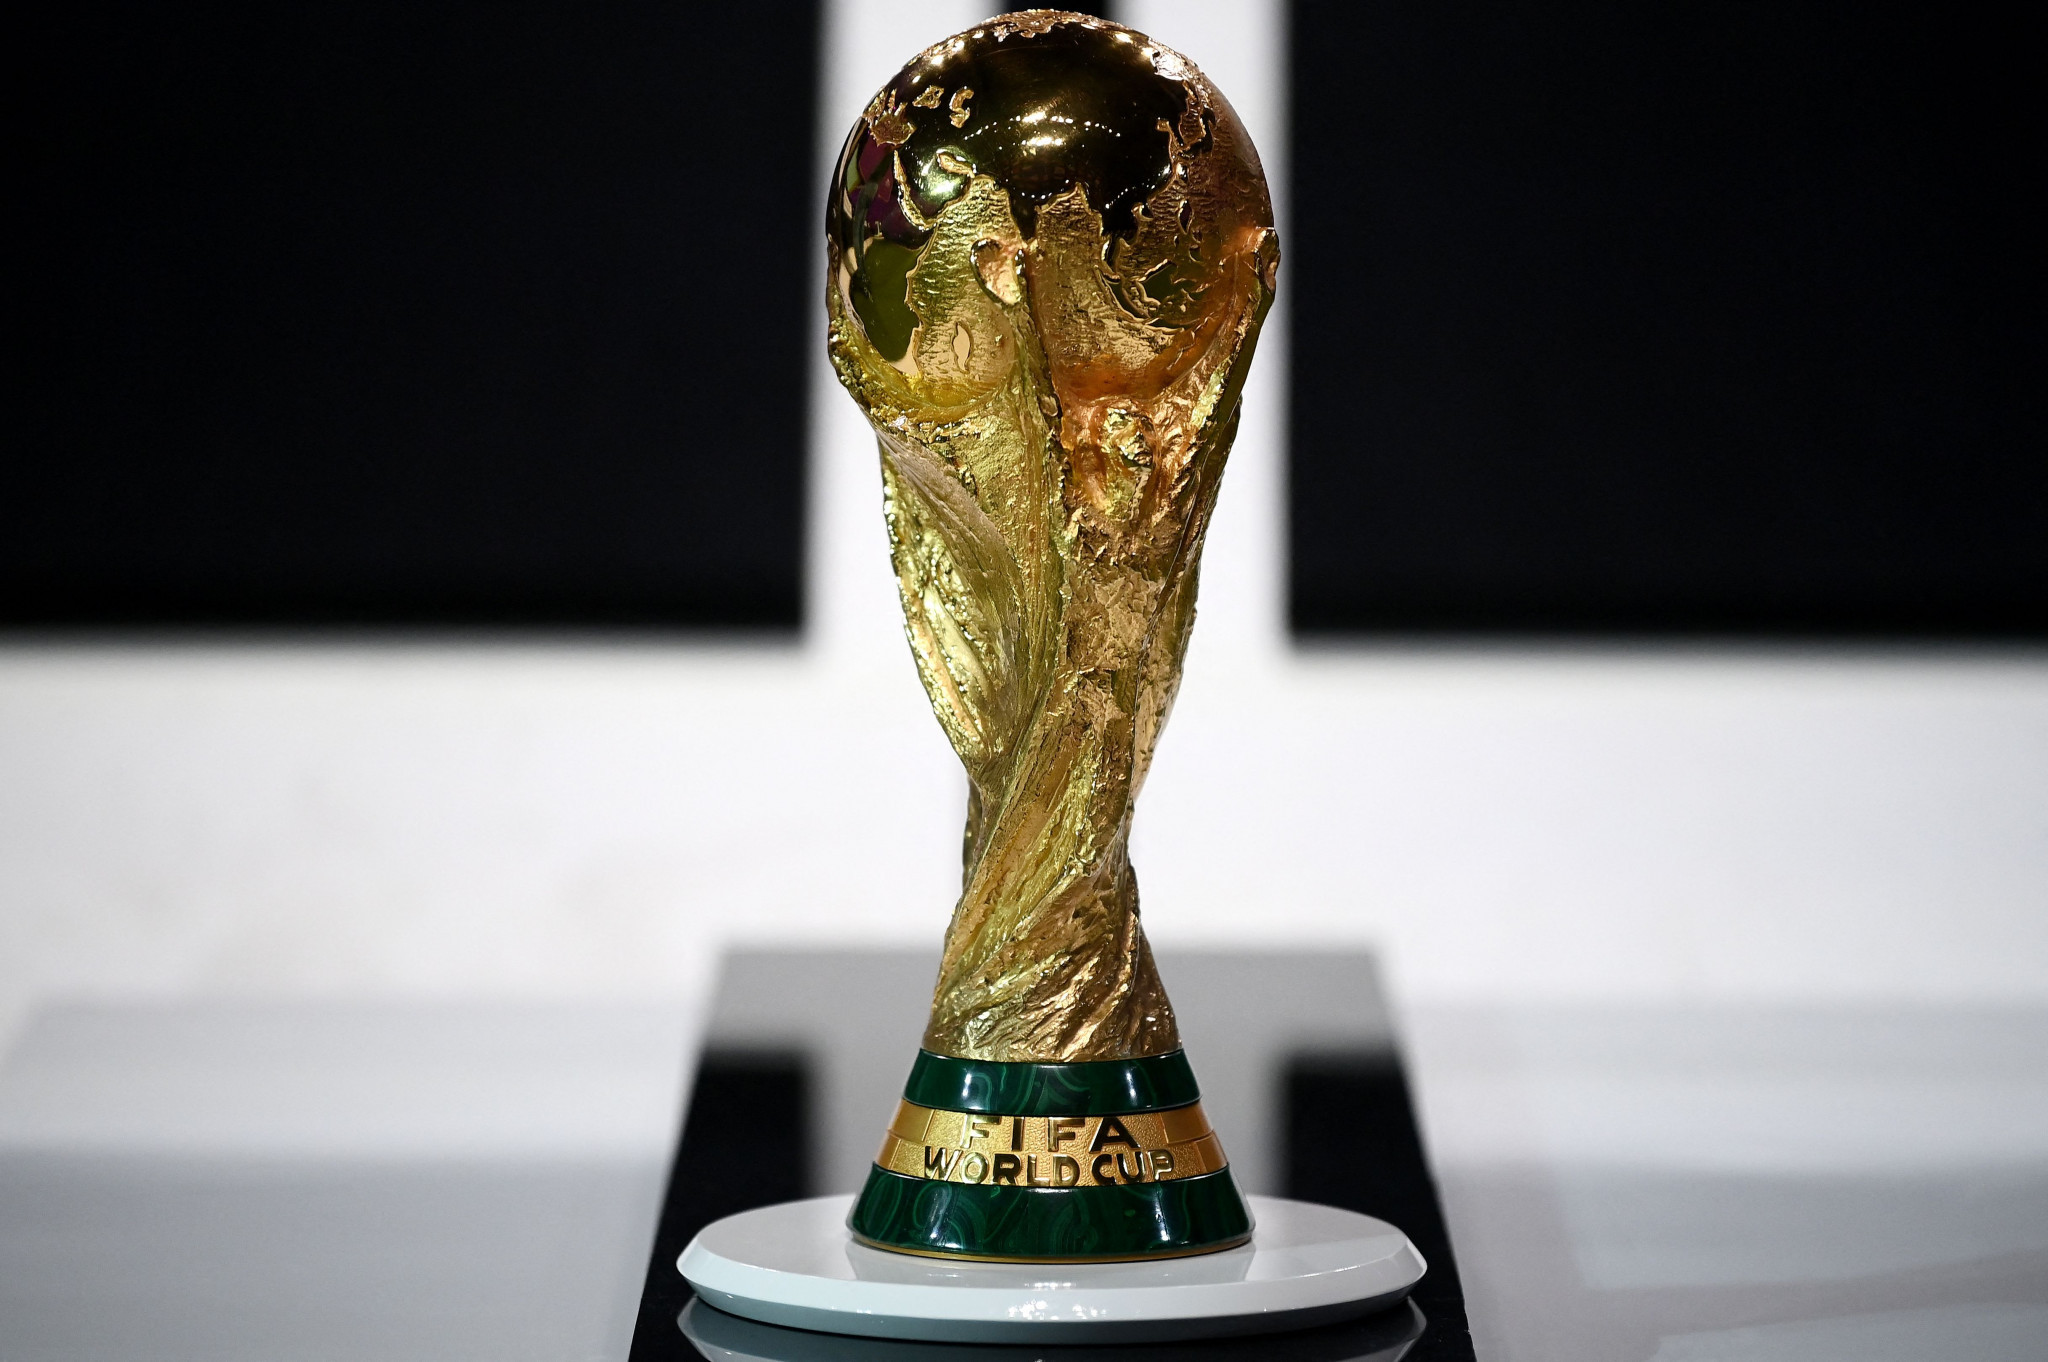 Organisers have been urged to make progress prior to the FIFA World Cup opening in November ©Getty Images